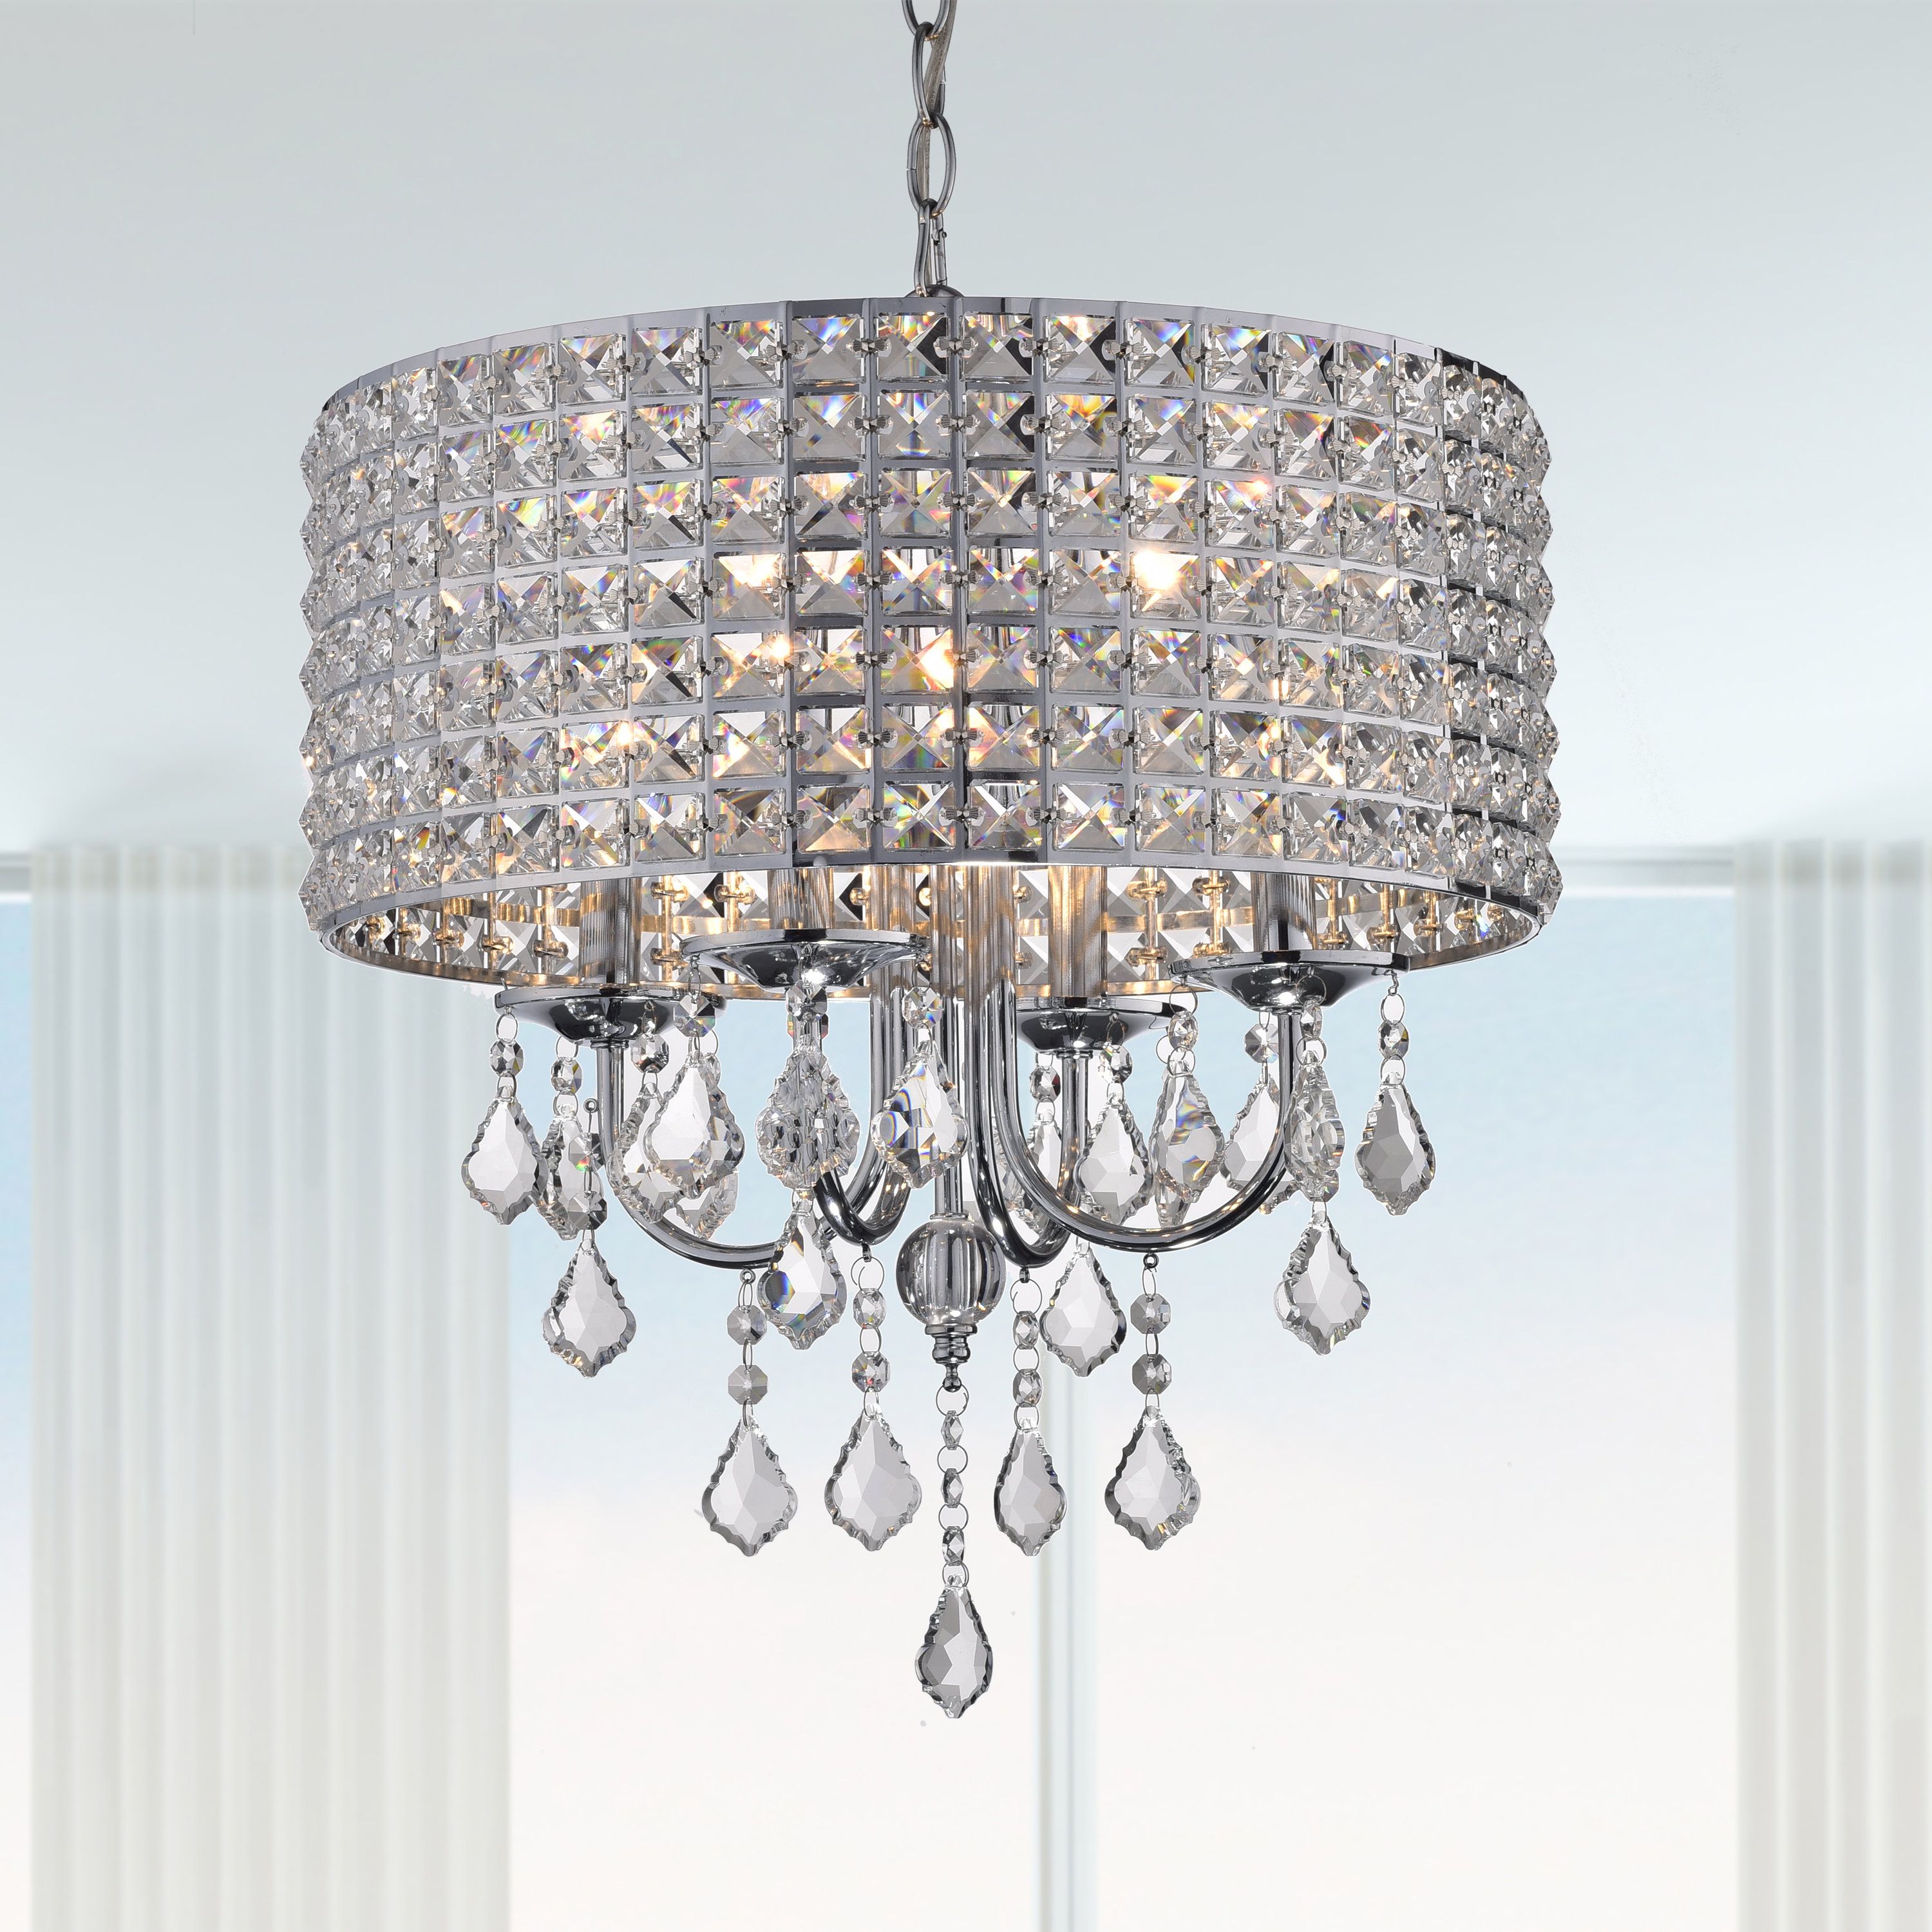 Albano 4 Light Crystal Chandelier Within Popular Jill 4 Light Drum Chandeliers (View 19 of 25)